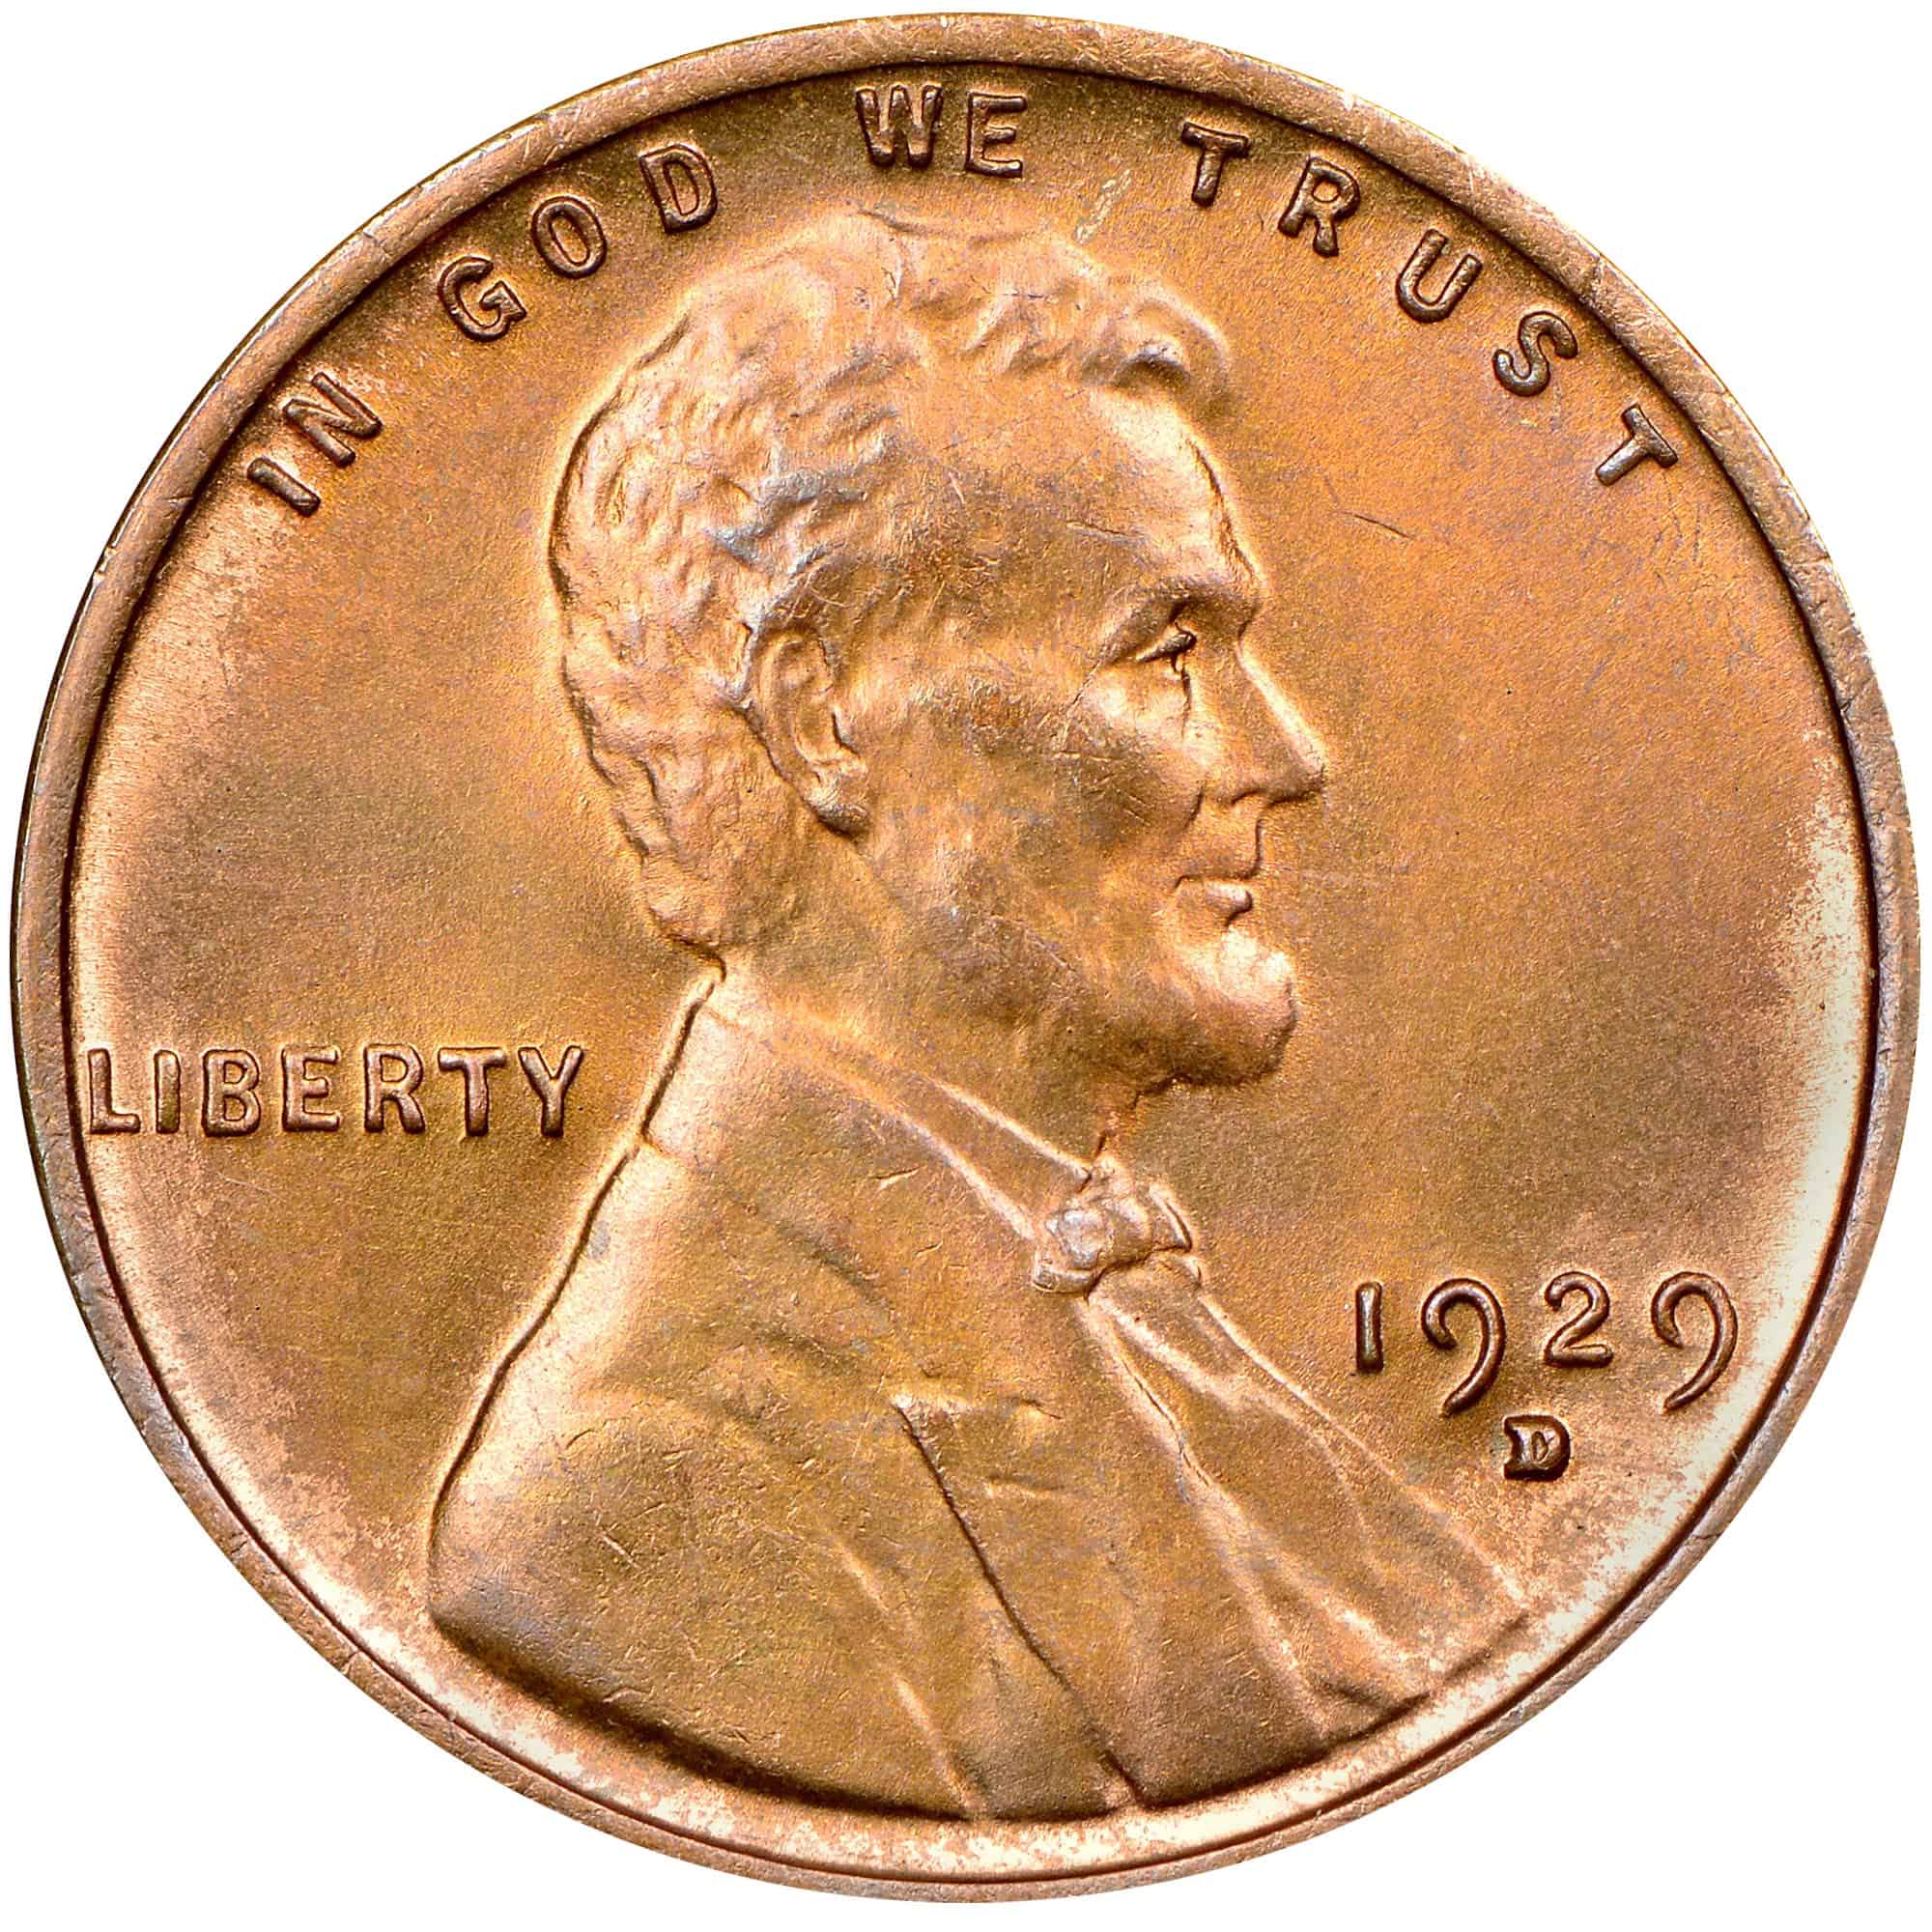 The Obverse of the 1929 Wheat Penny